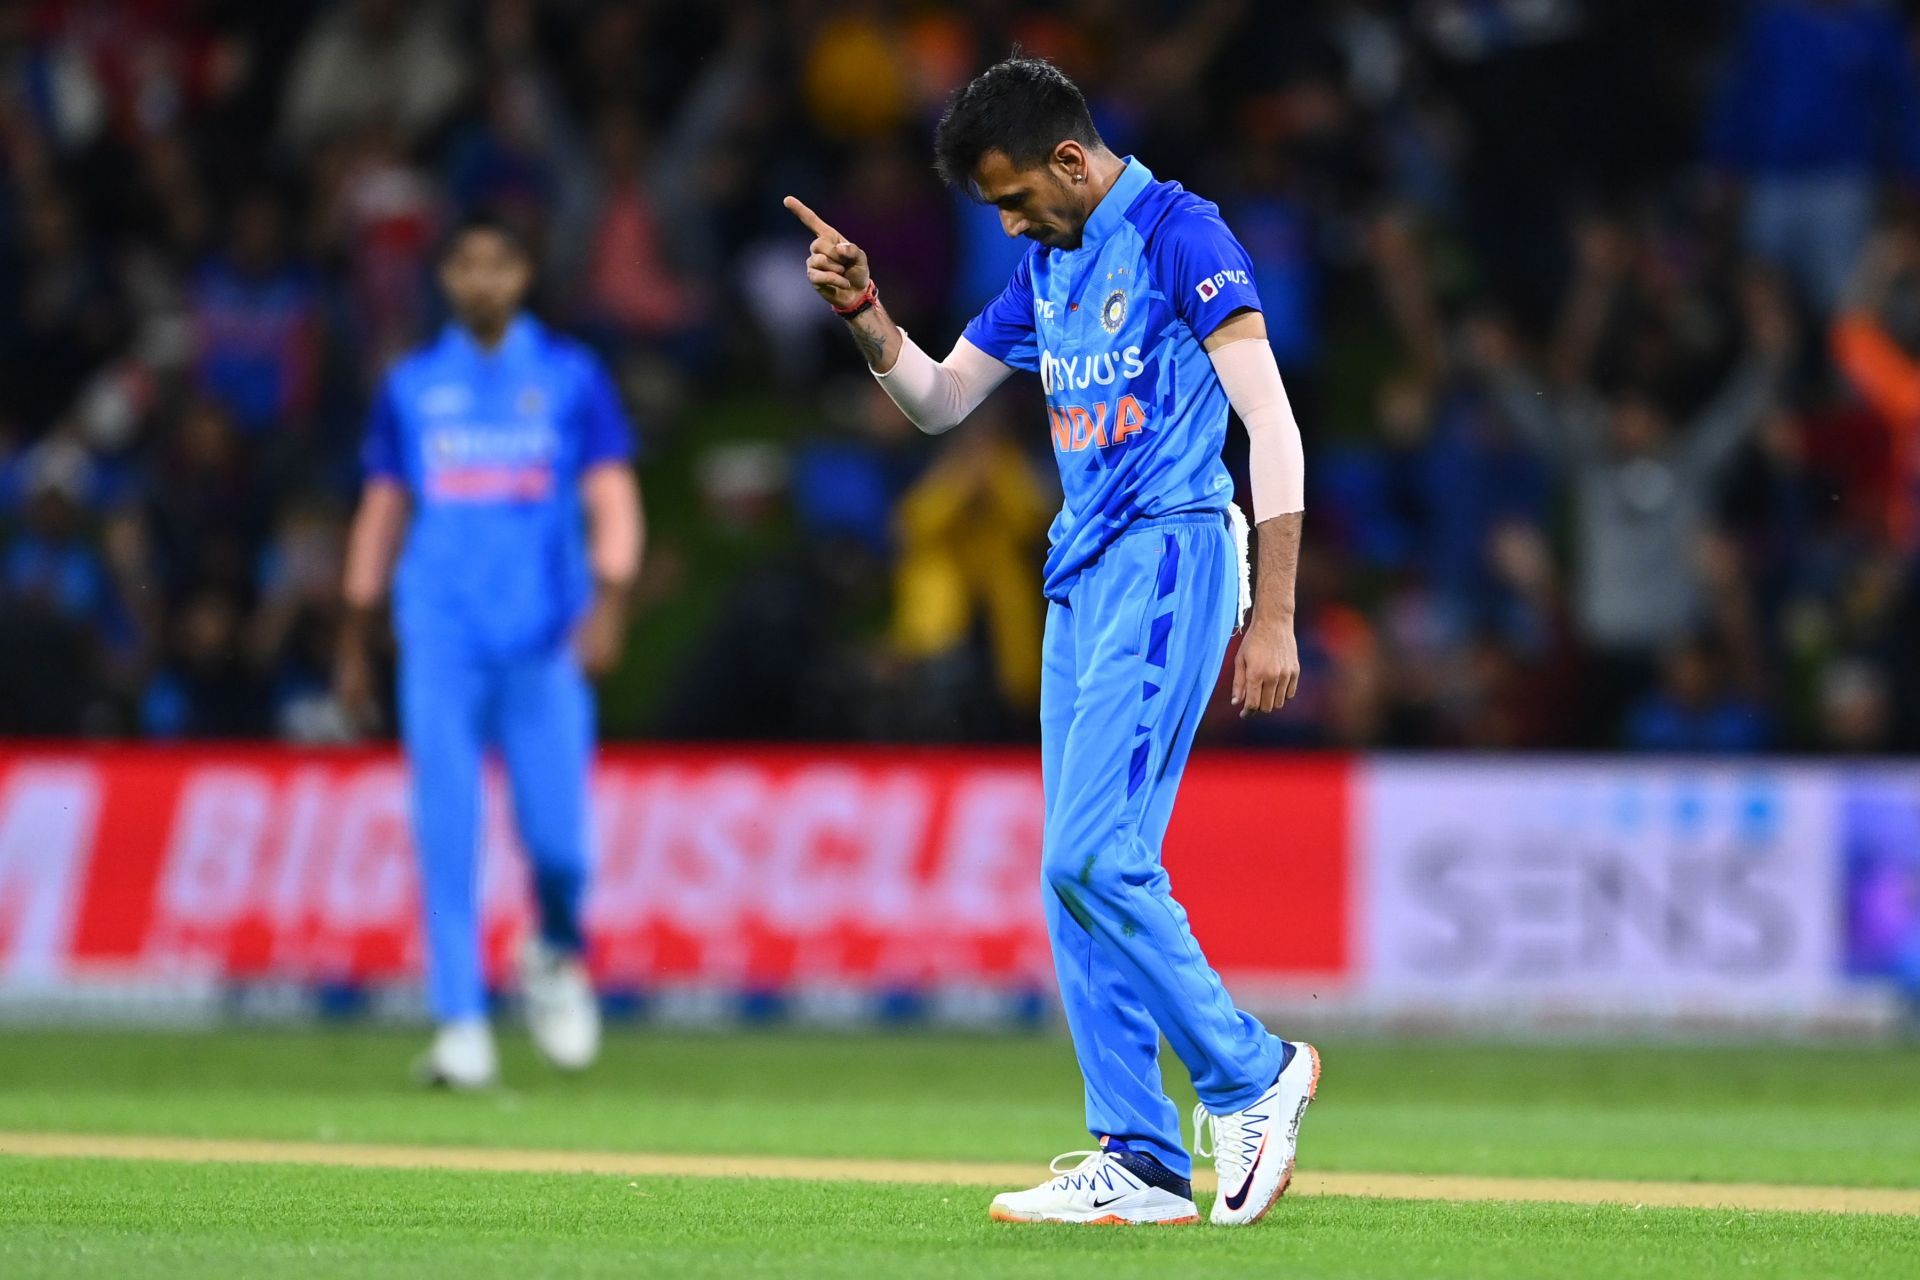 Team India leg-spinner Yuzvendra Chahal (Image Credit: Getty Images)